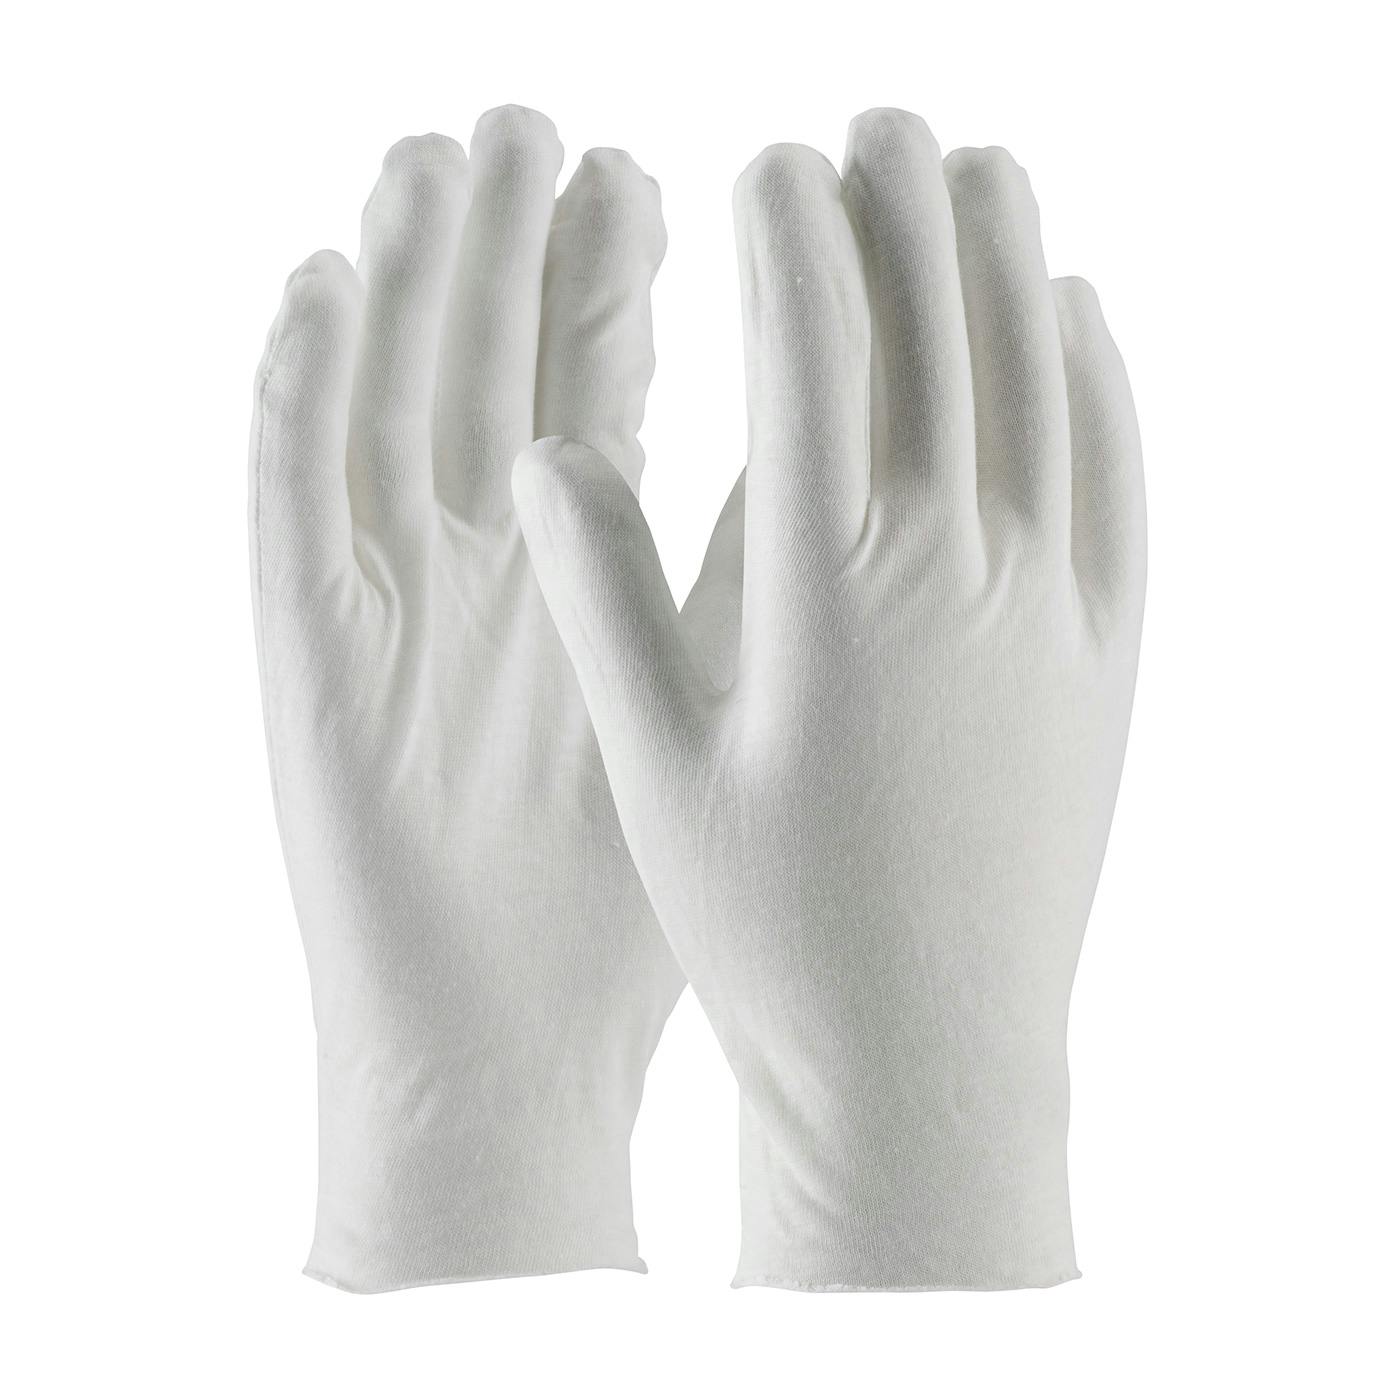 Medium Weight Cotton Lisle Inspection Glove with Unhemmed Cuff - 10.", White (97-520/10) - MENS